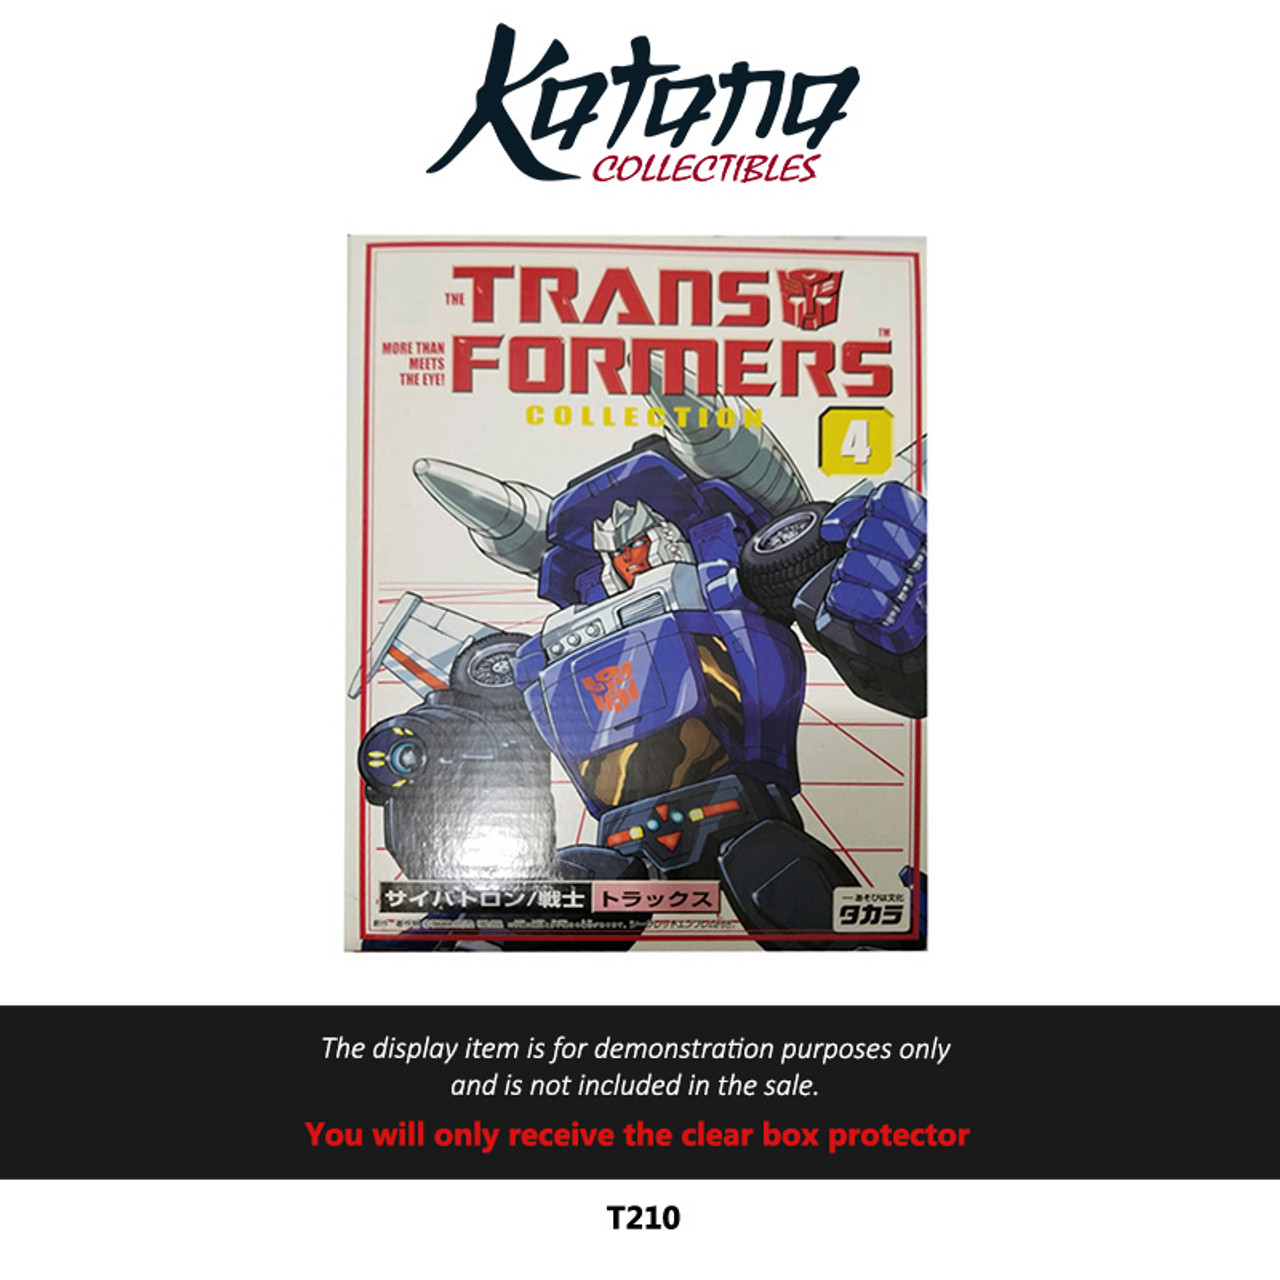 Katana Collectibles Protector For Transformers Collection Tracks Figure